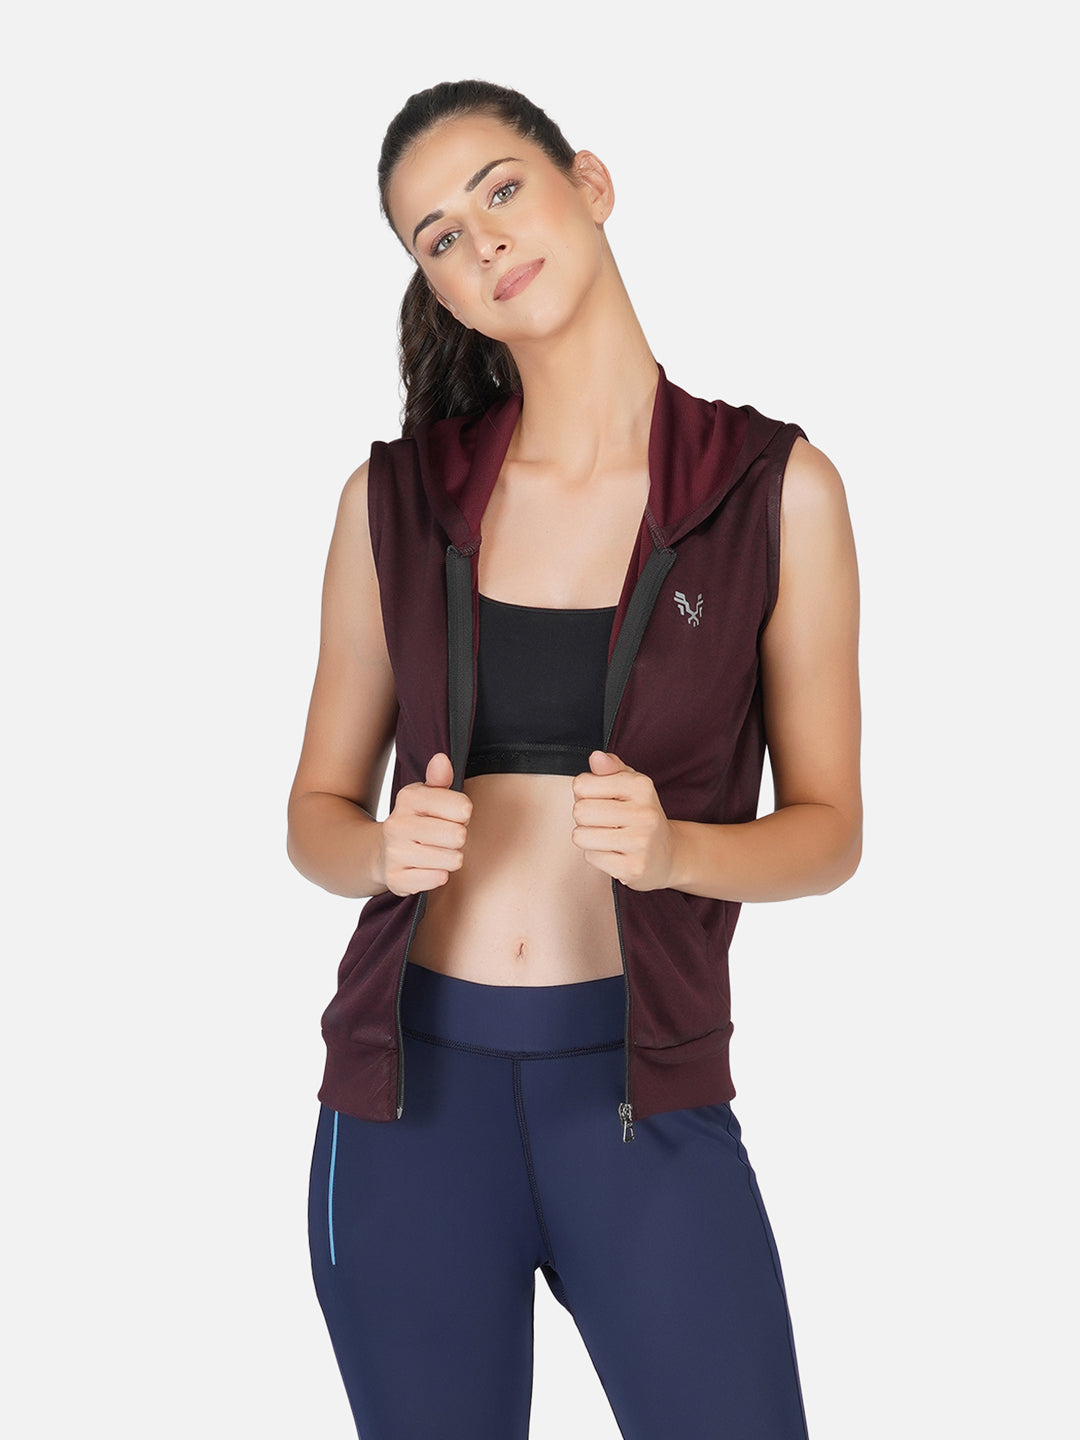 Women's Athletic Tops - Sports Bras, Jackets, Hoodies, Shirts & Tanks –  Tagged longline – Vitality Athletic Apparel